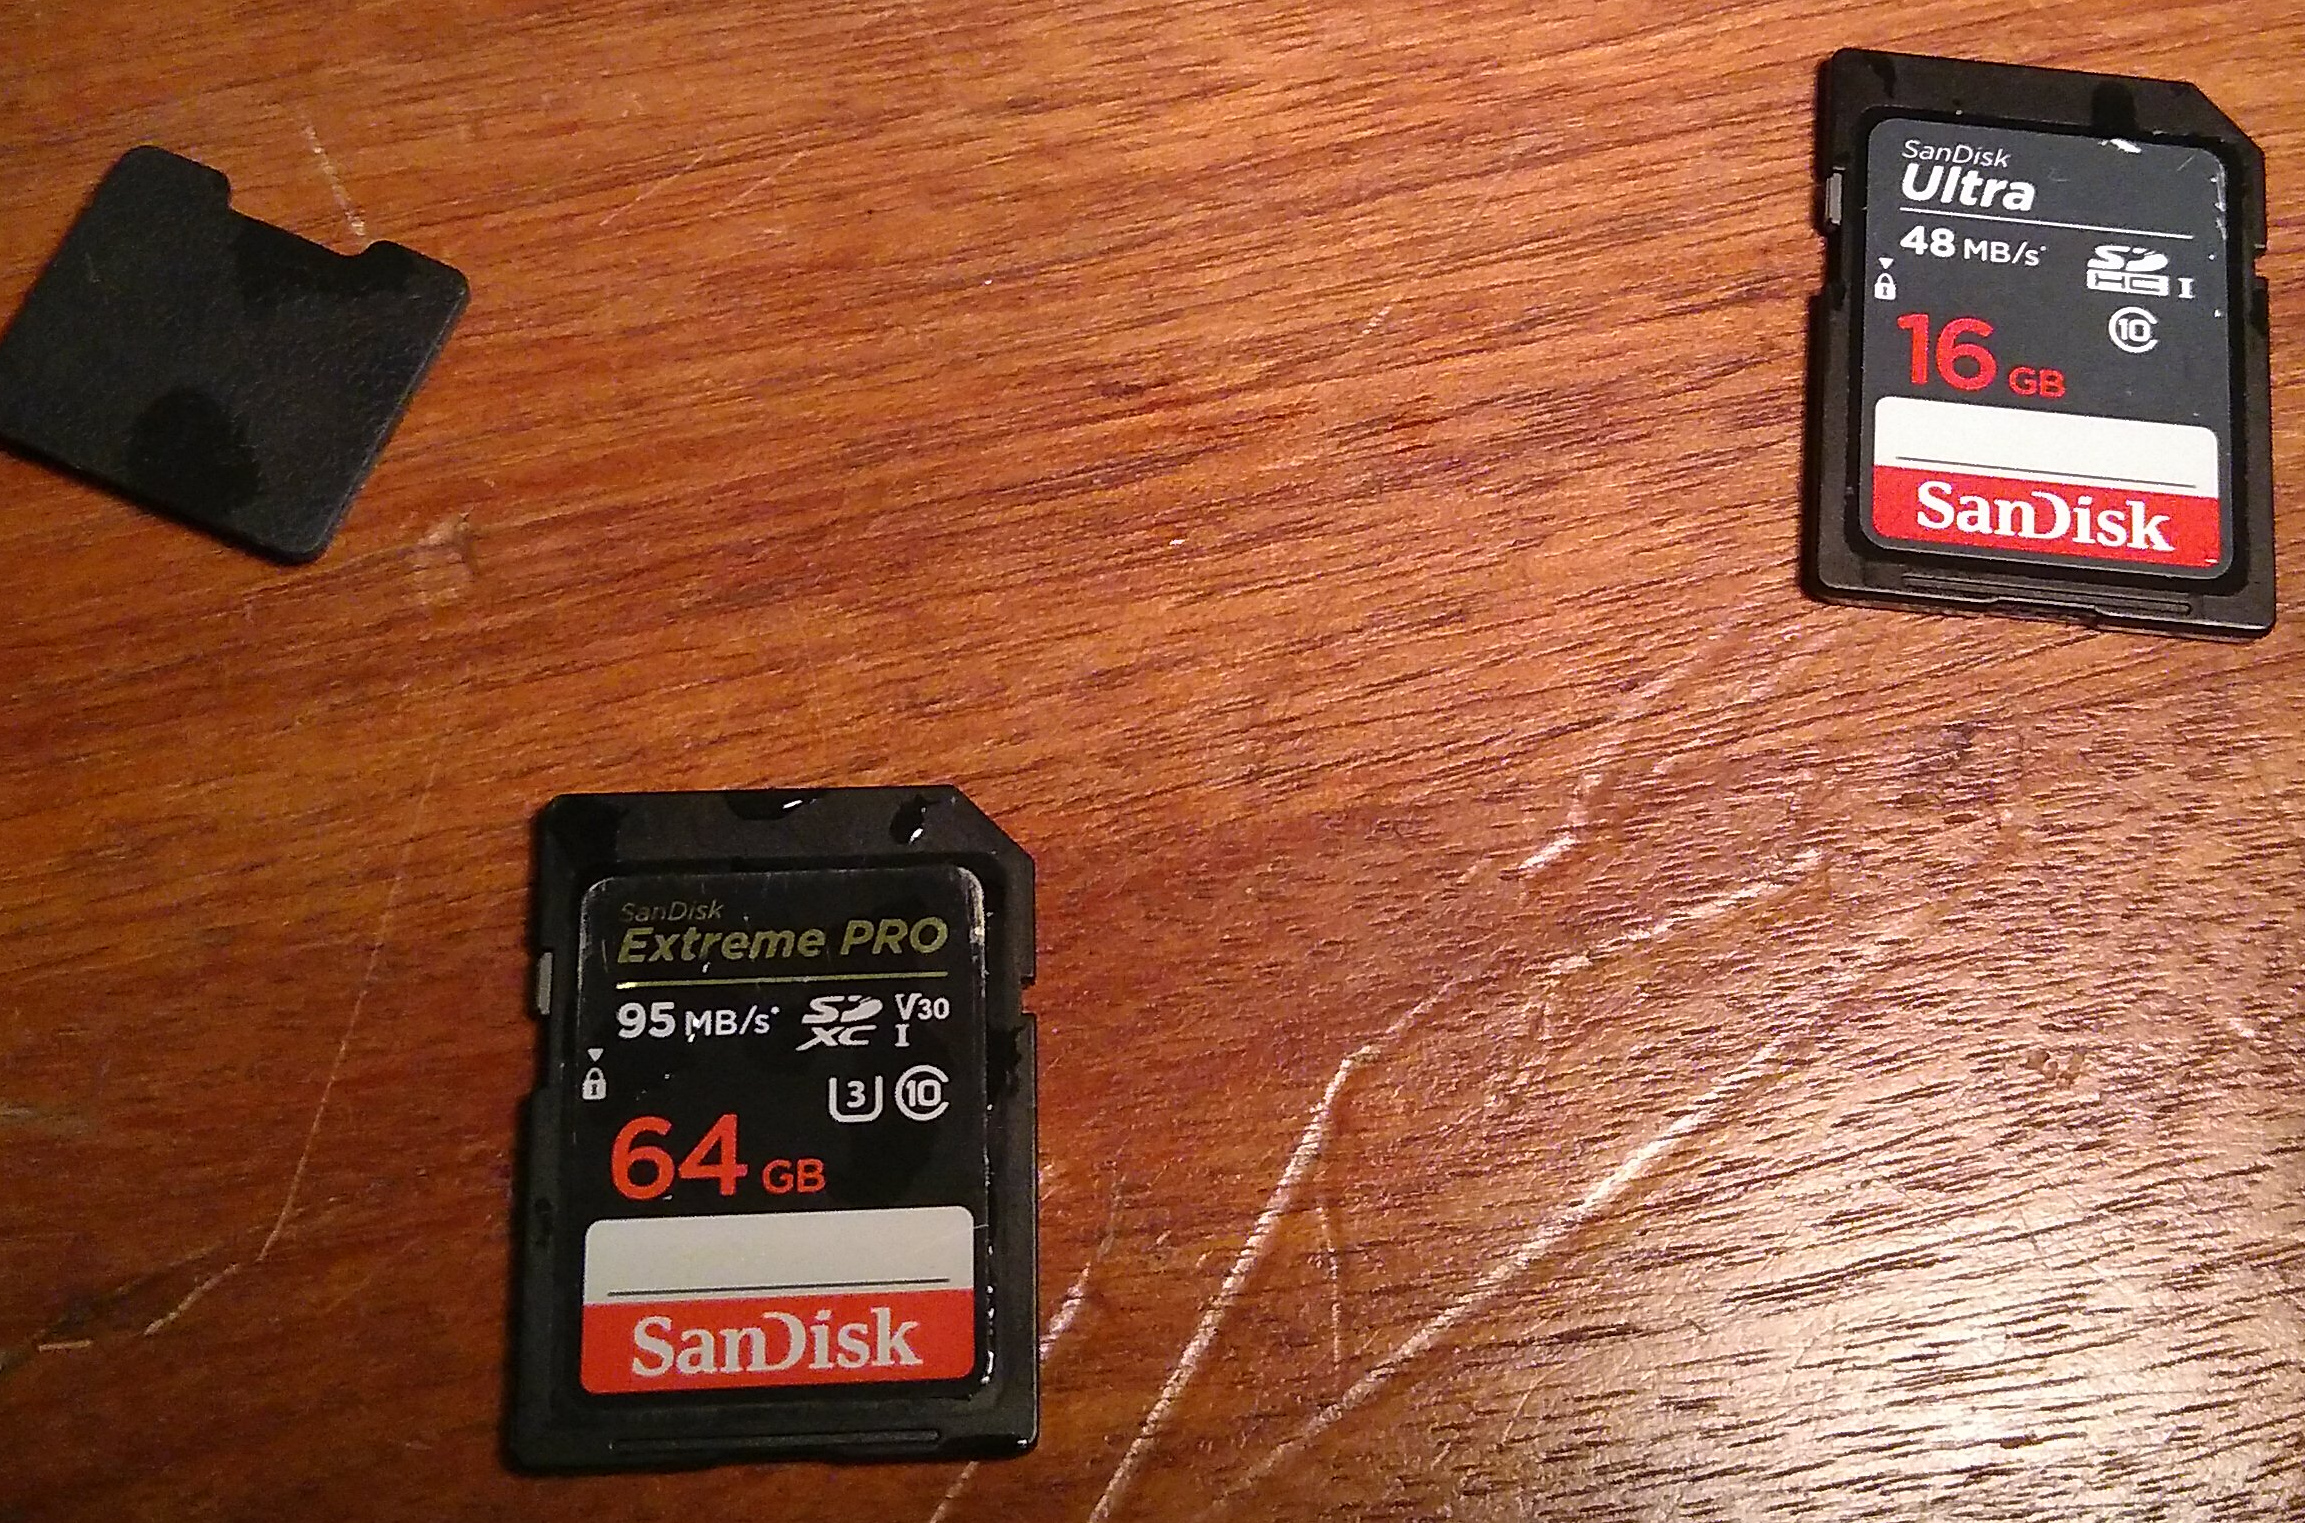 Two Sandisk memory cards with
water droplets on them